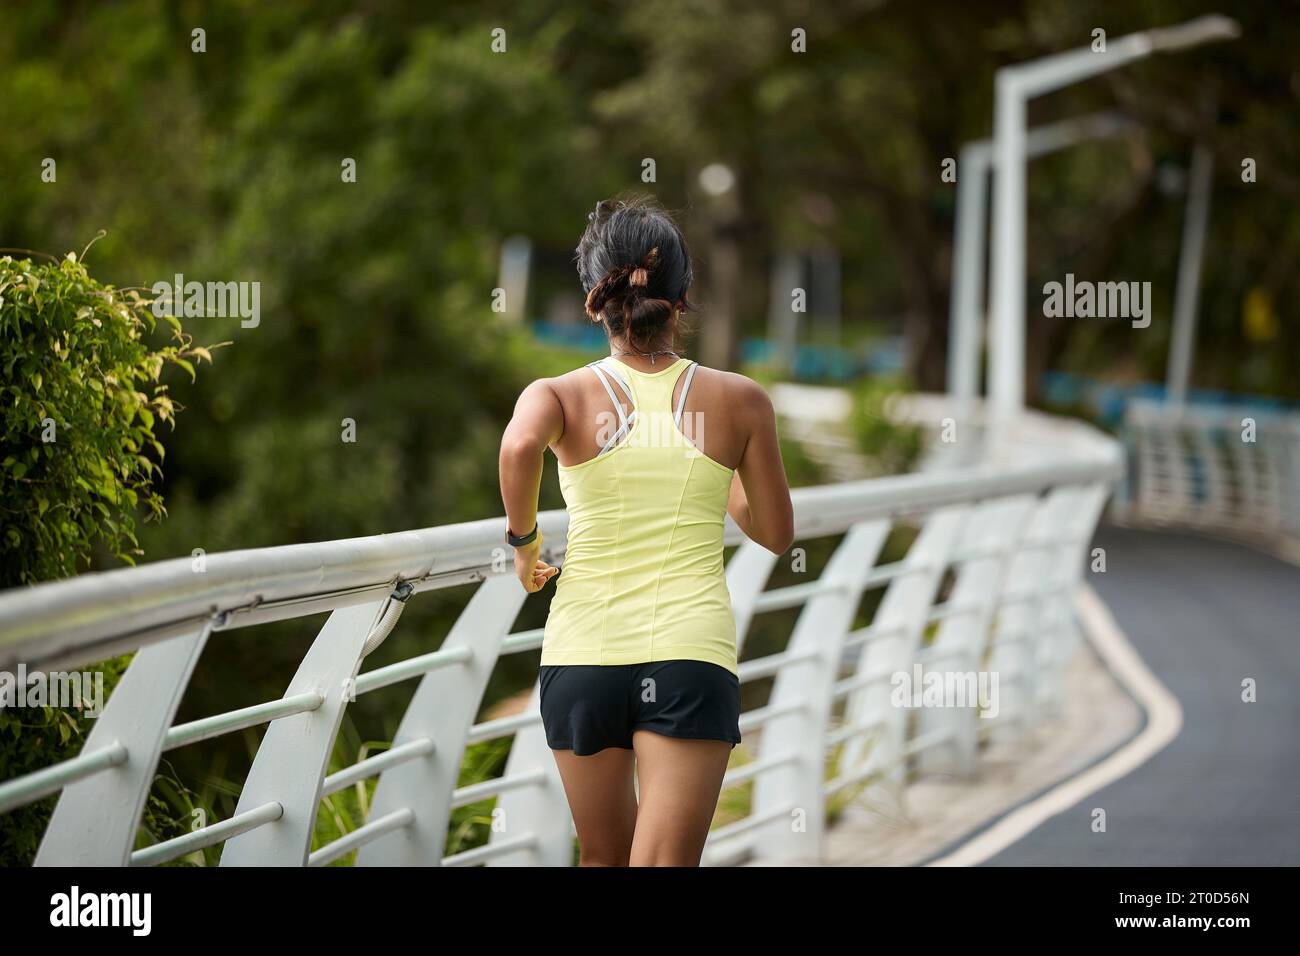 rear view of young asian woman running jogging exercising outdoors in city park Stock Photo